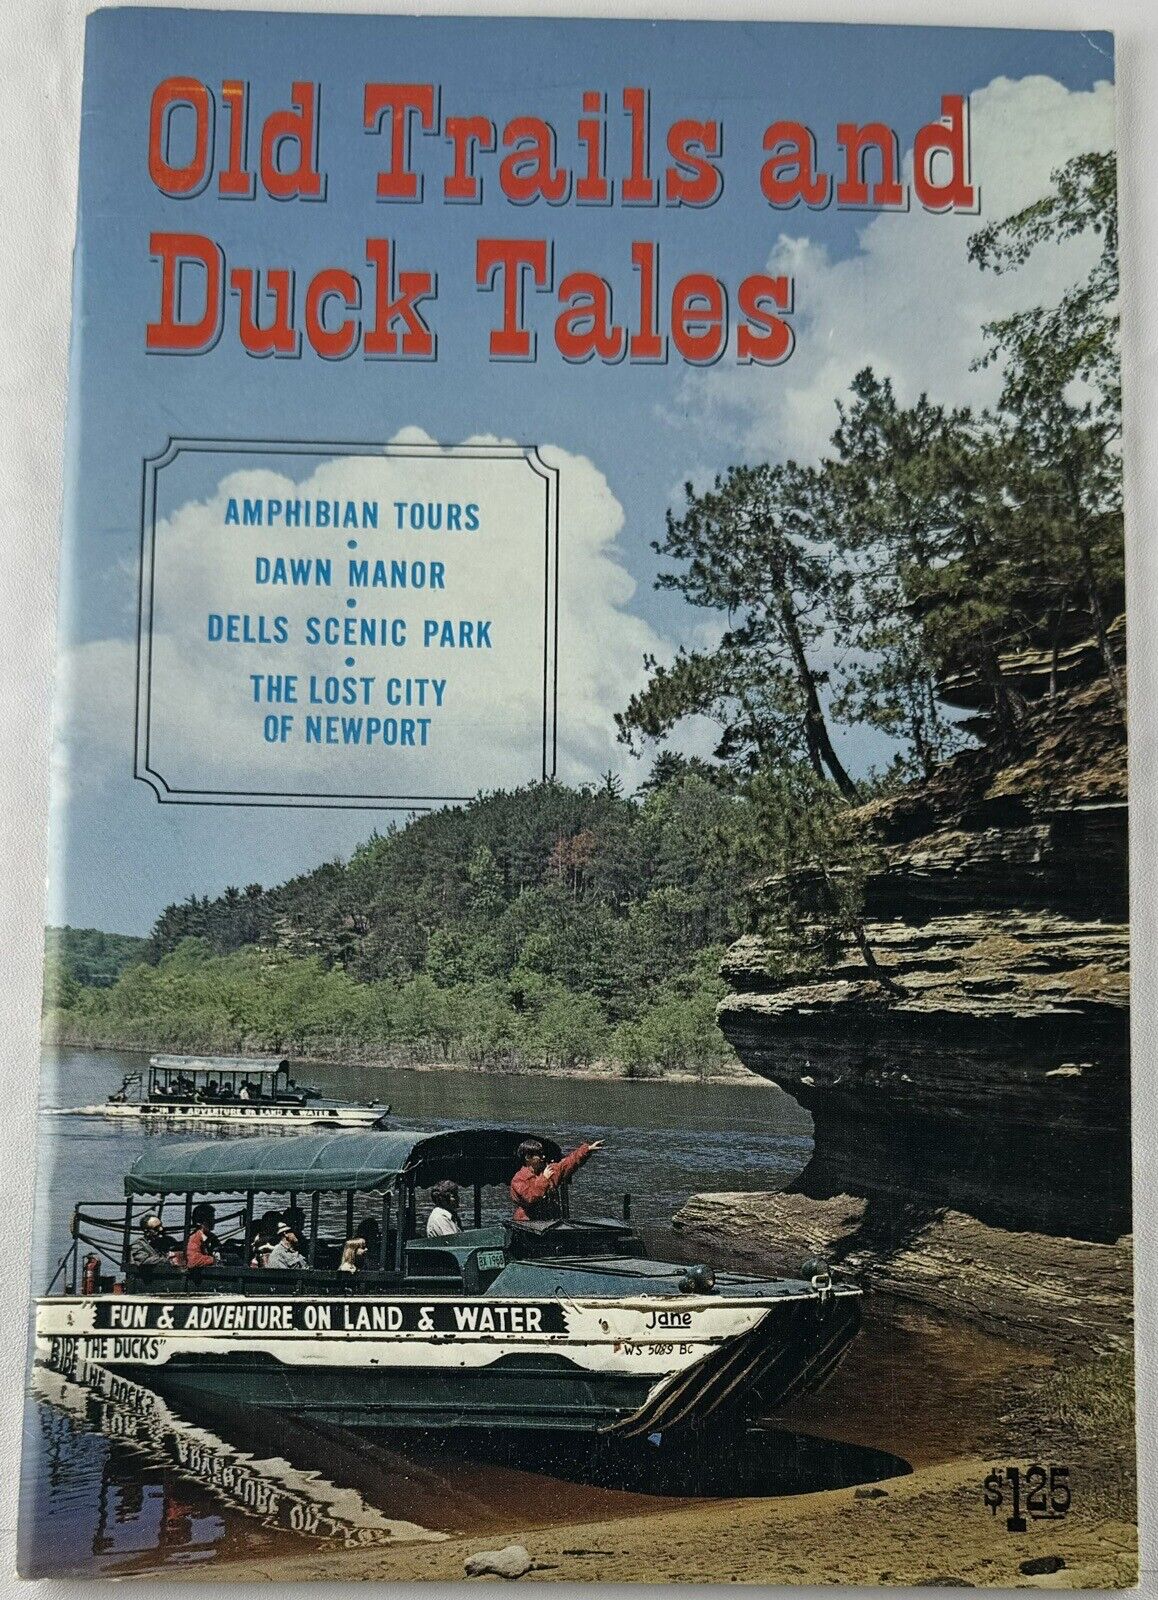 OLD TRAILS AND WISCONSIN DELLS DUCK TAILS COLOR SCENIC BOOK SOUVENIR GUIDE 72